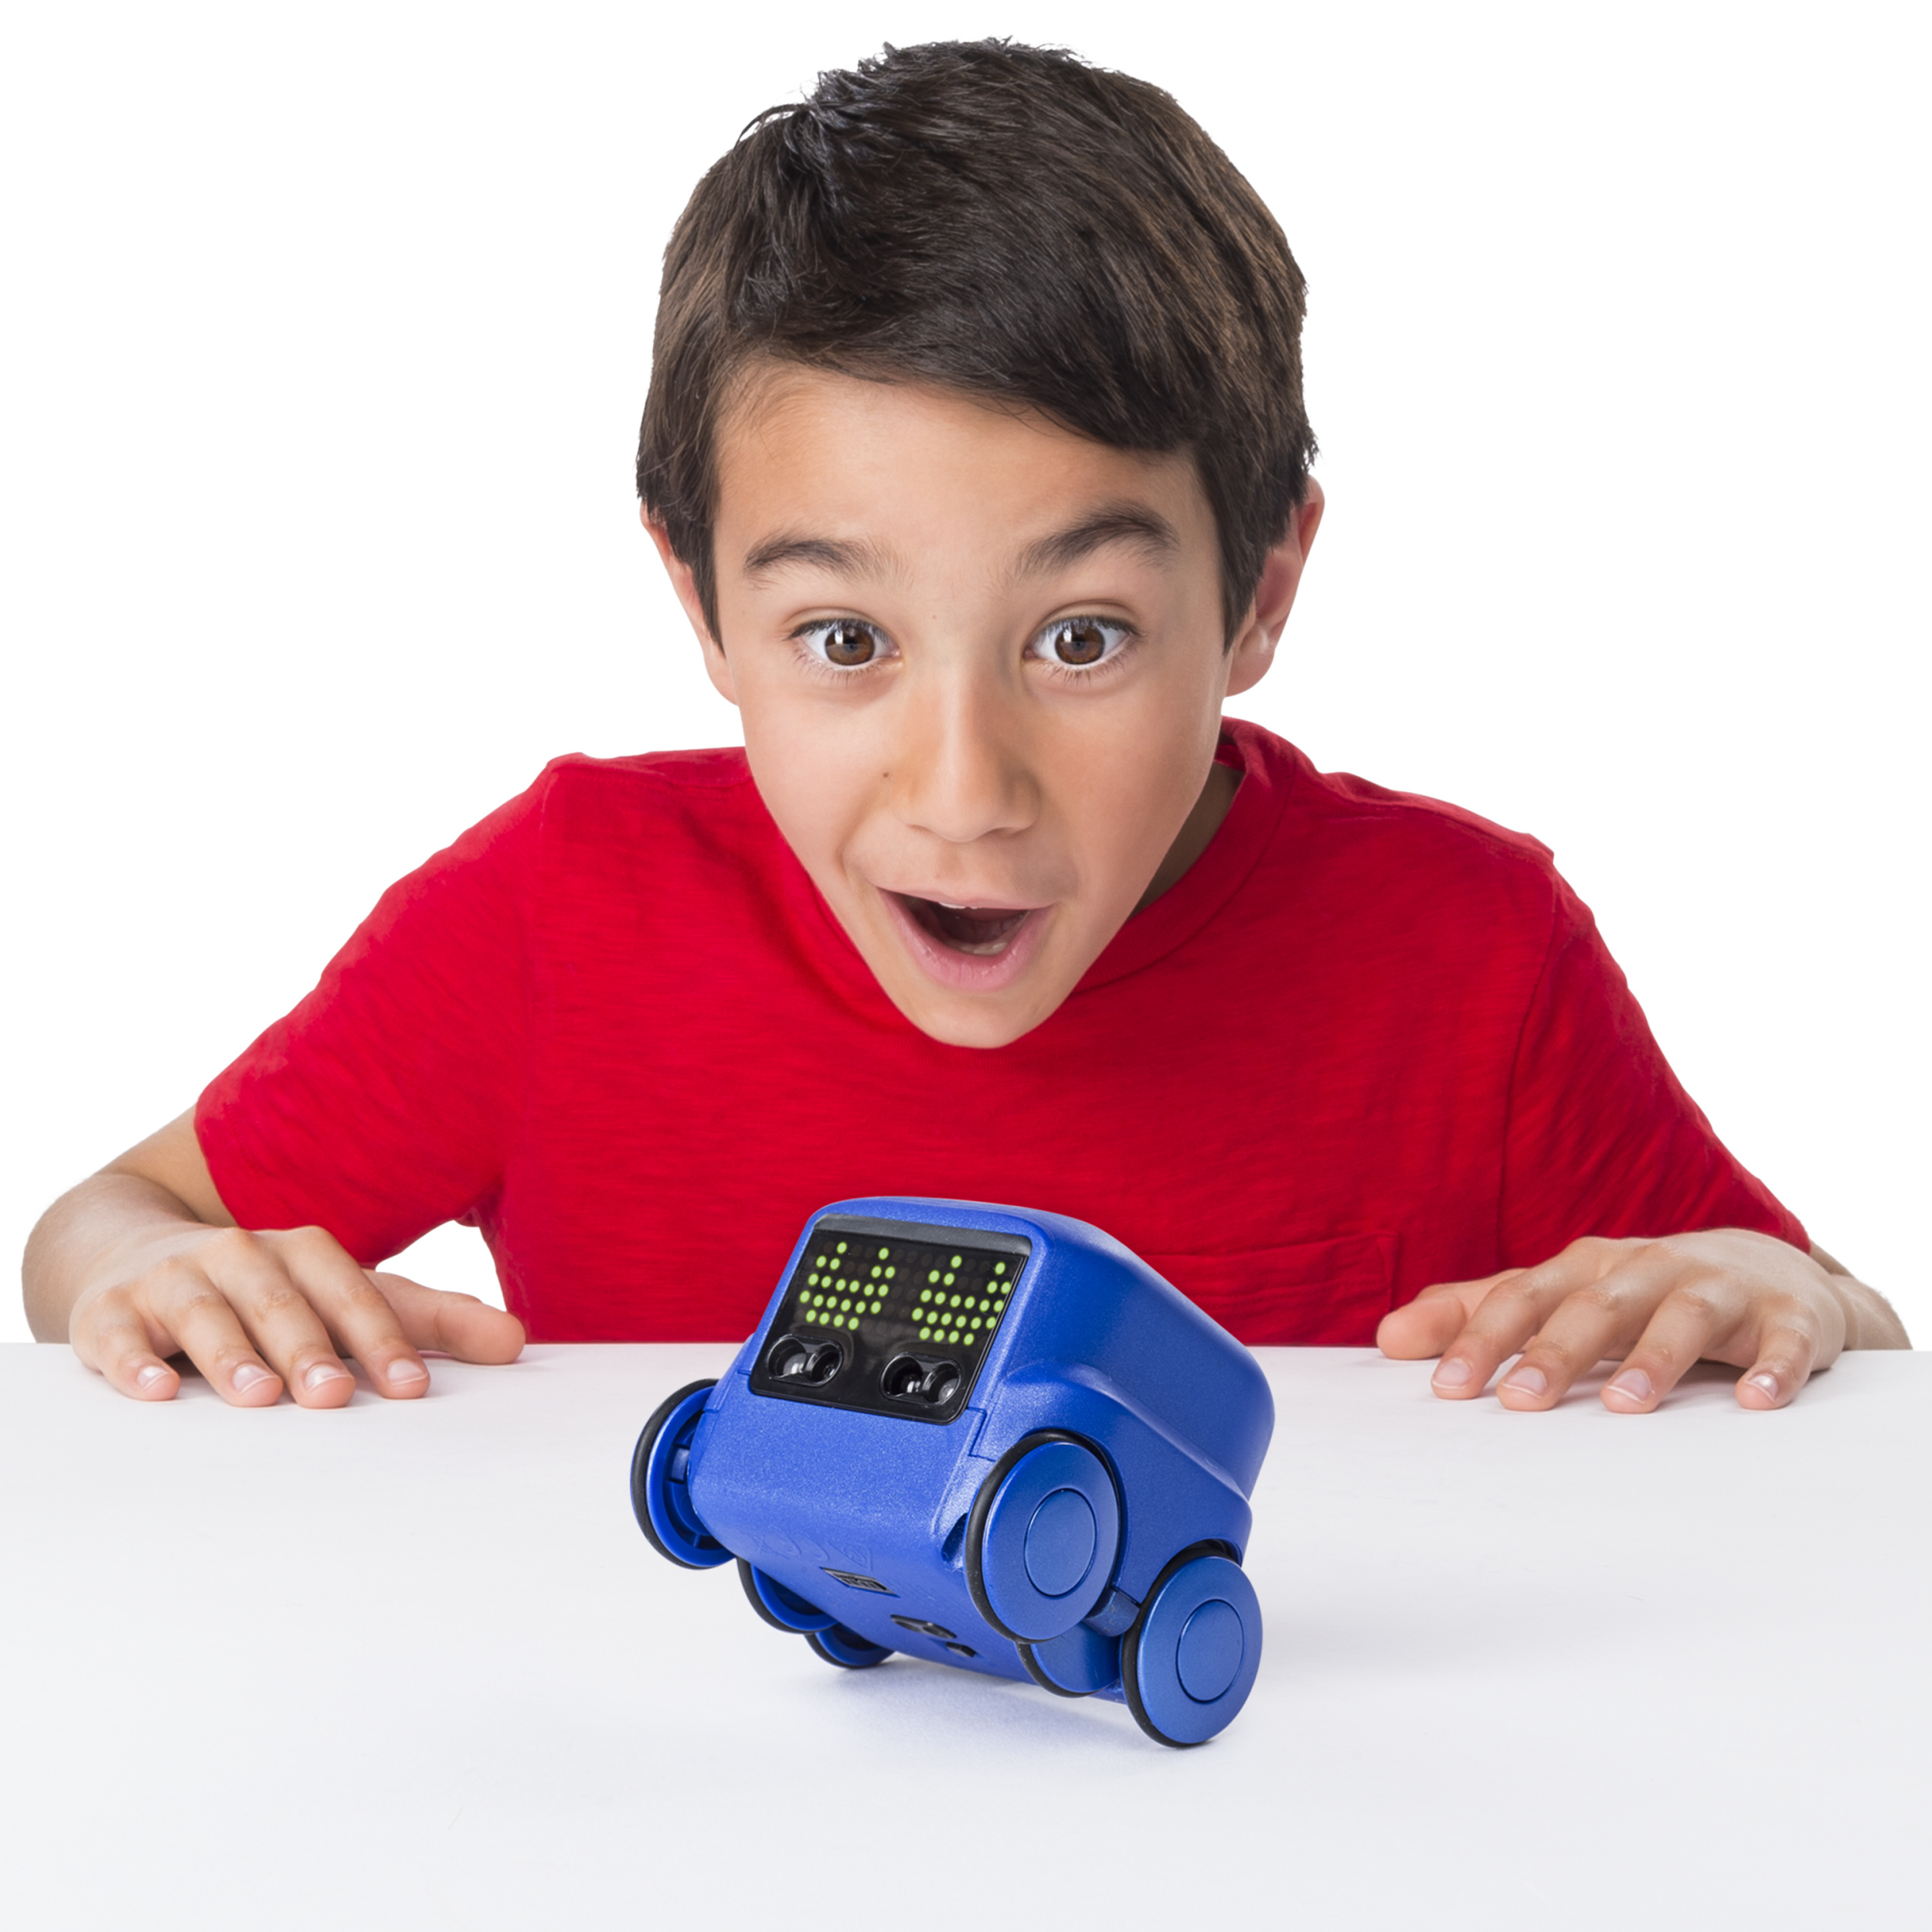 Boxer - Interactive A.I. Robot Toy (Blue) with Personality and Emotions, for Ages 6 and up - image 4 of 14